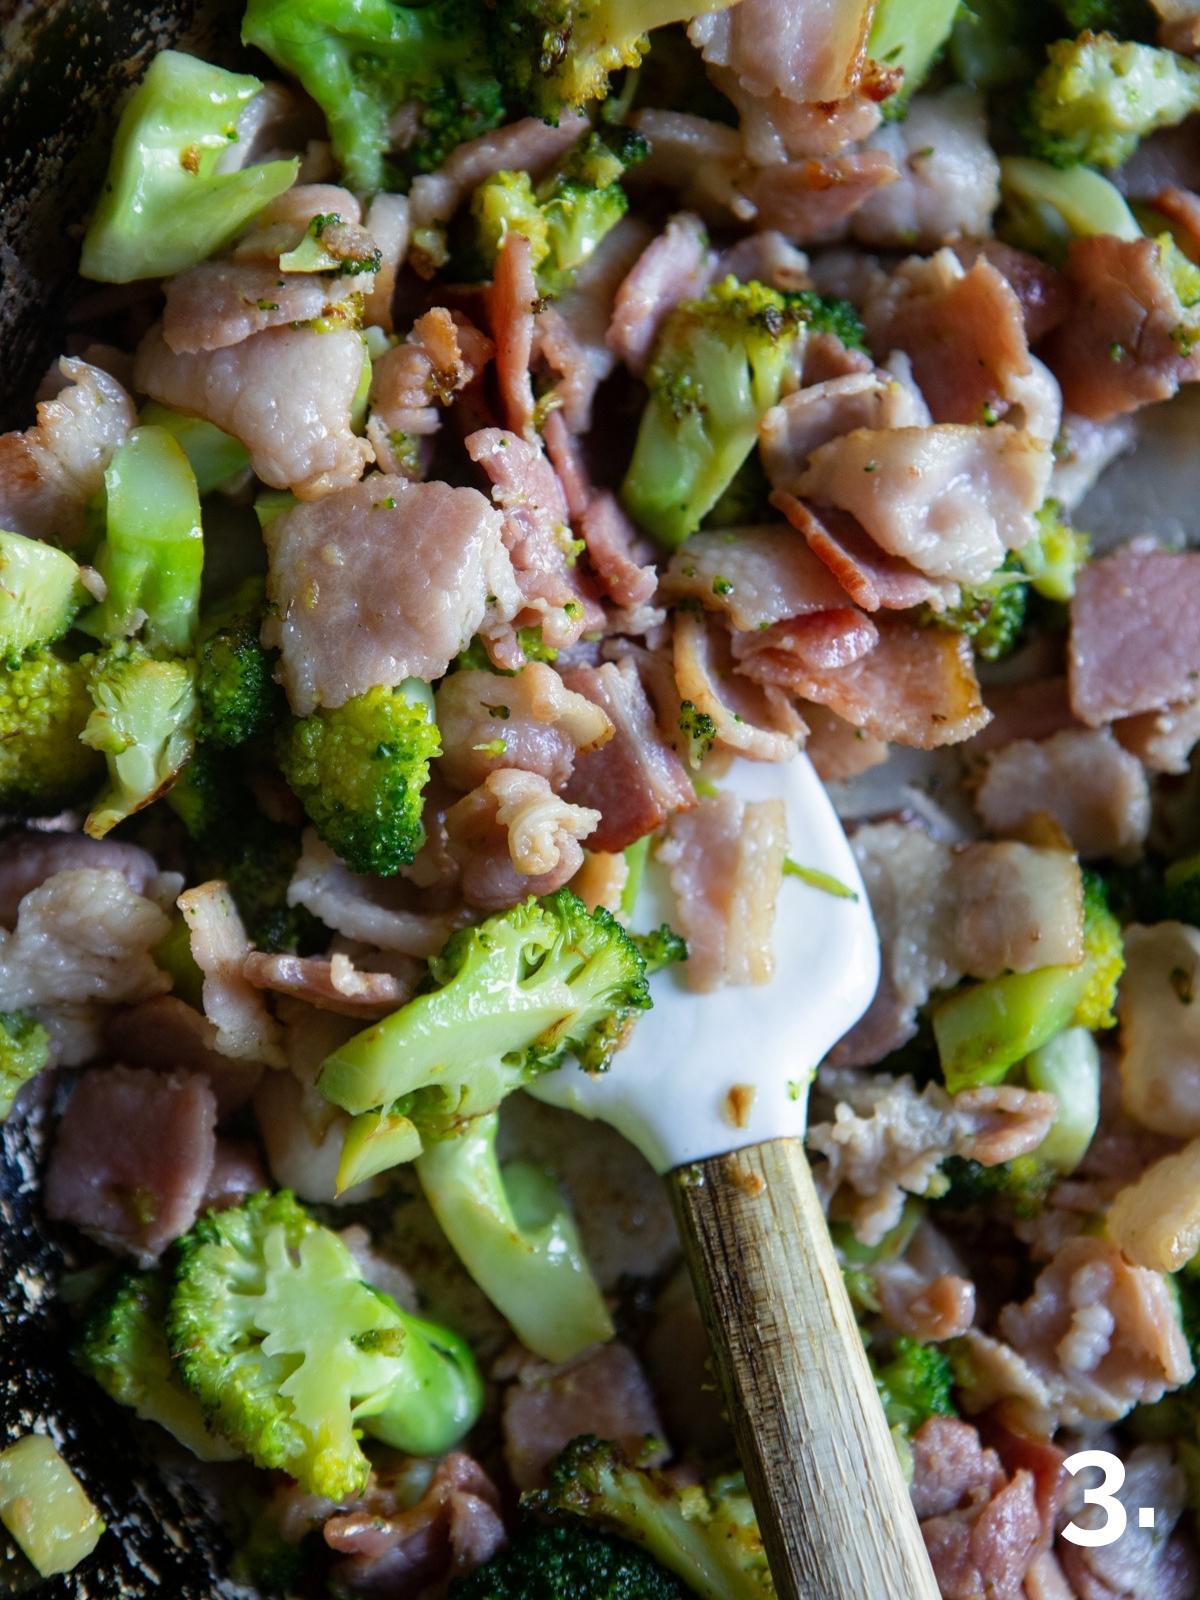 broccoli florets and bacon pieces being sautéed in a pan 